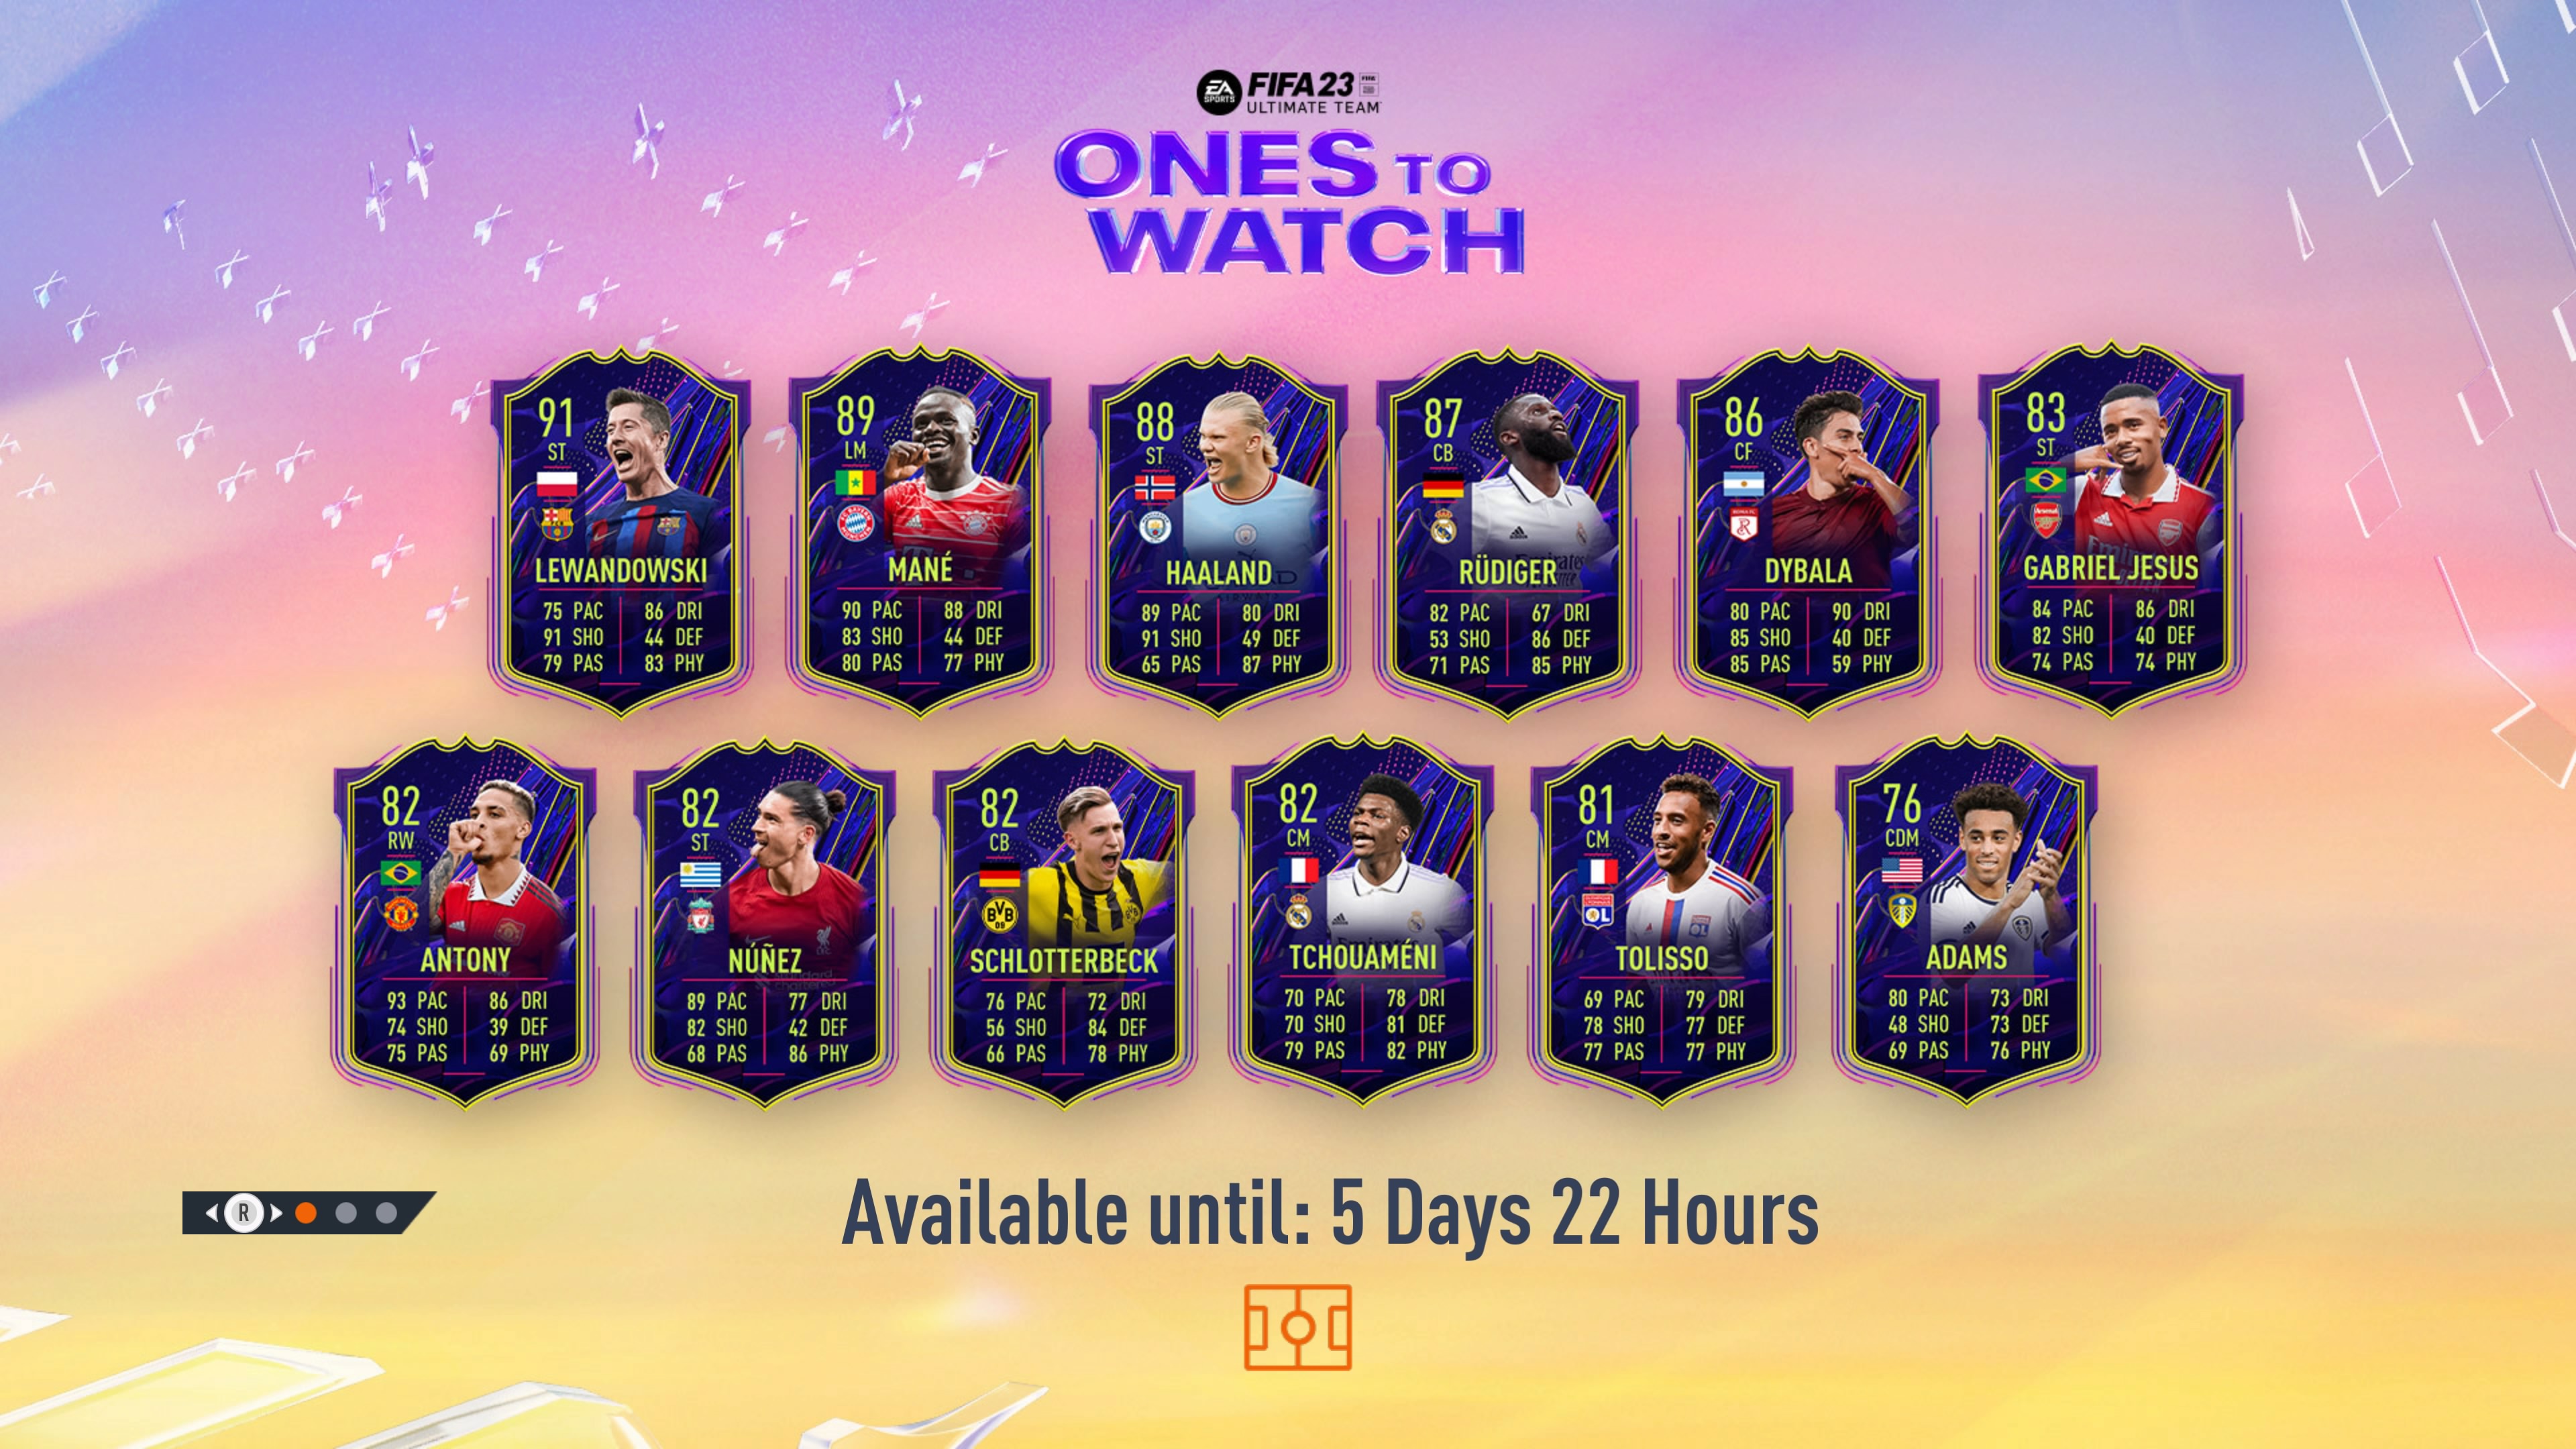 FIFA 23 Ones to Watch